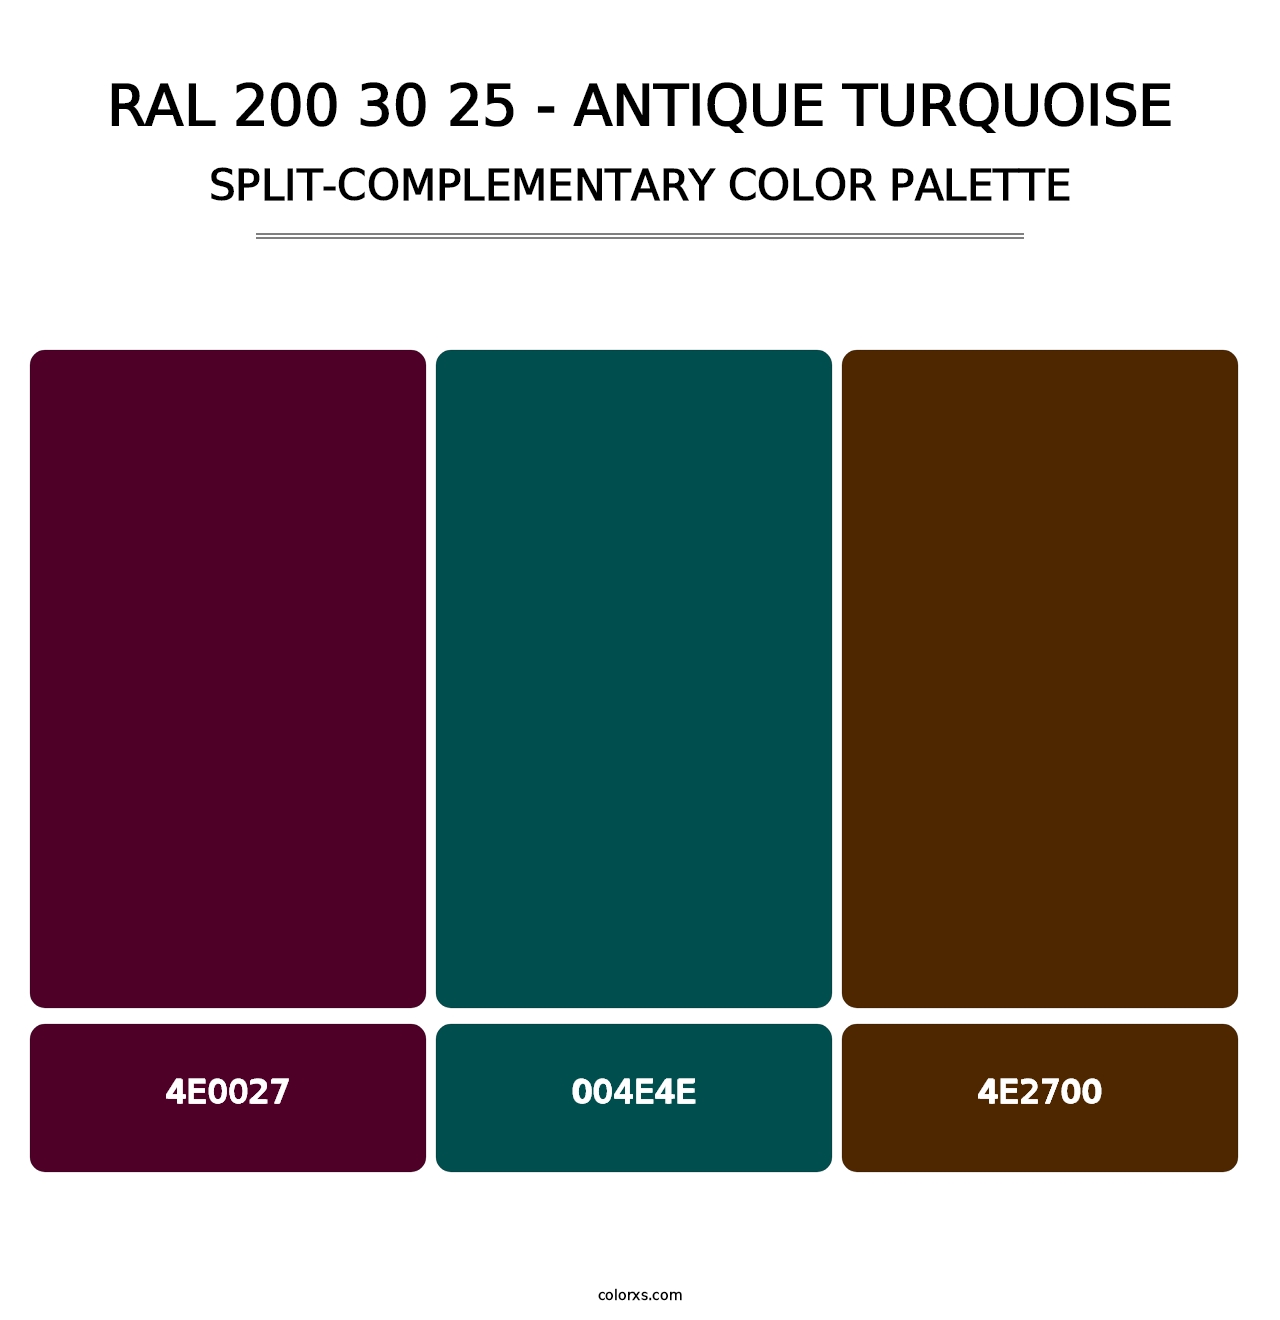 RAL 200 30 25 - Antique Turquoise - Split-Complementary Color Palette